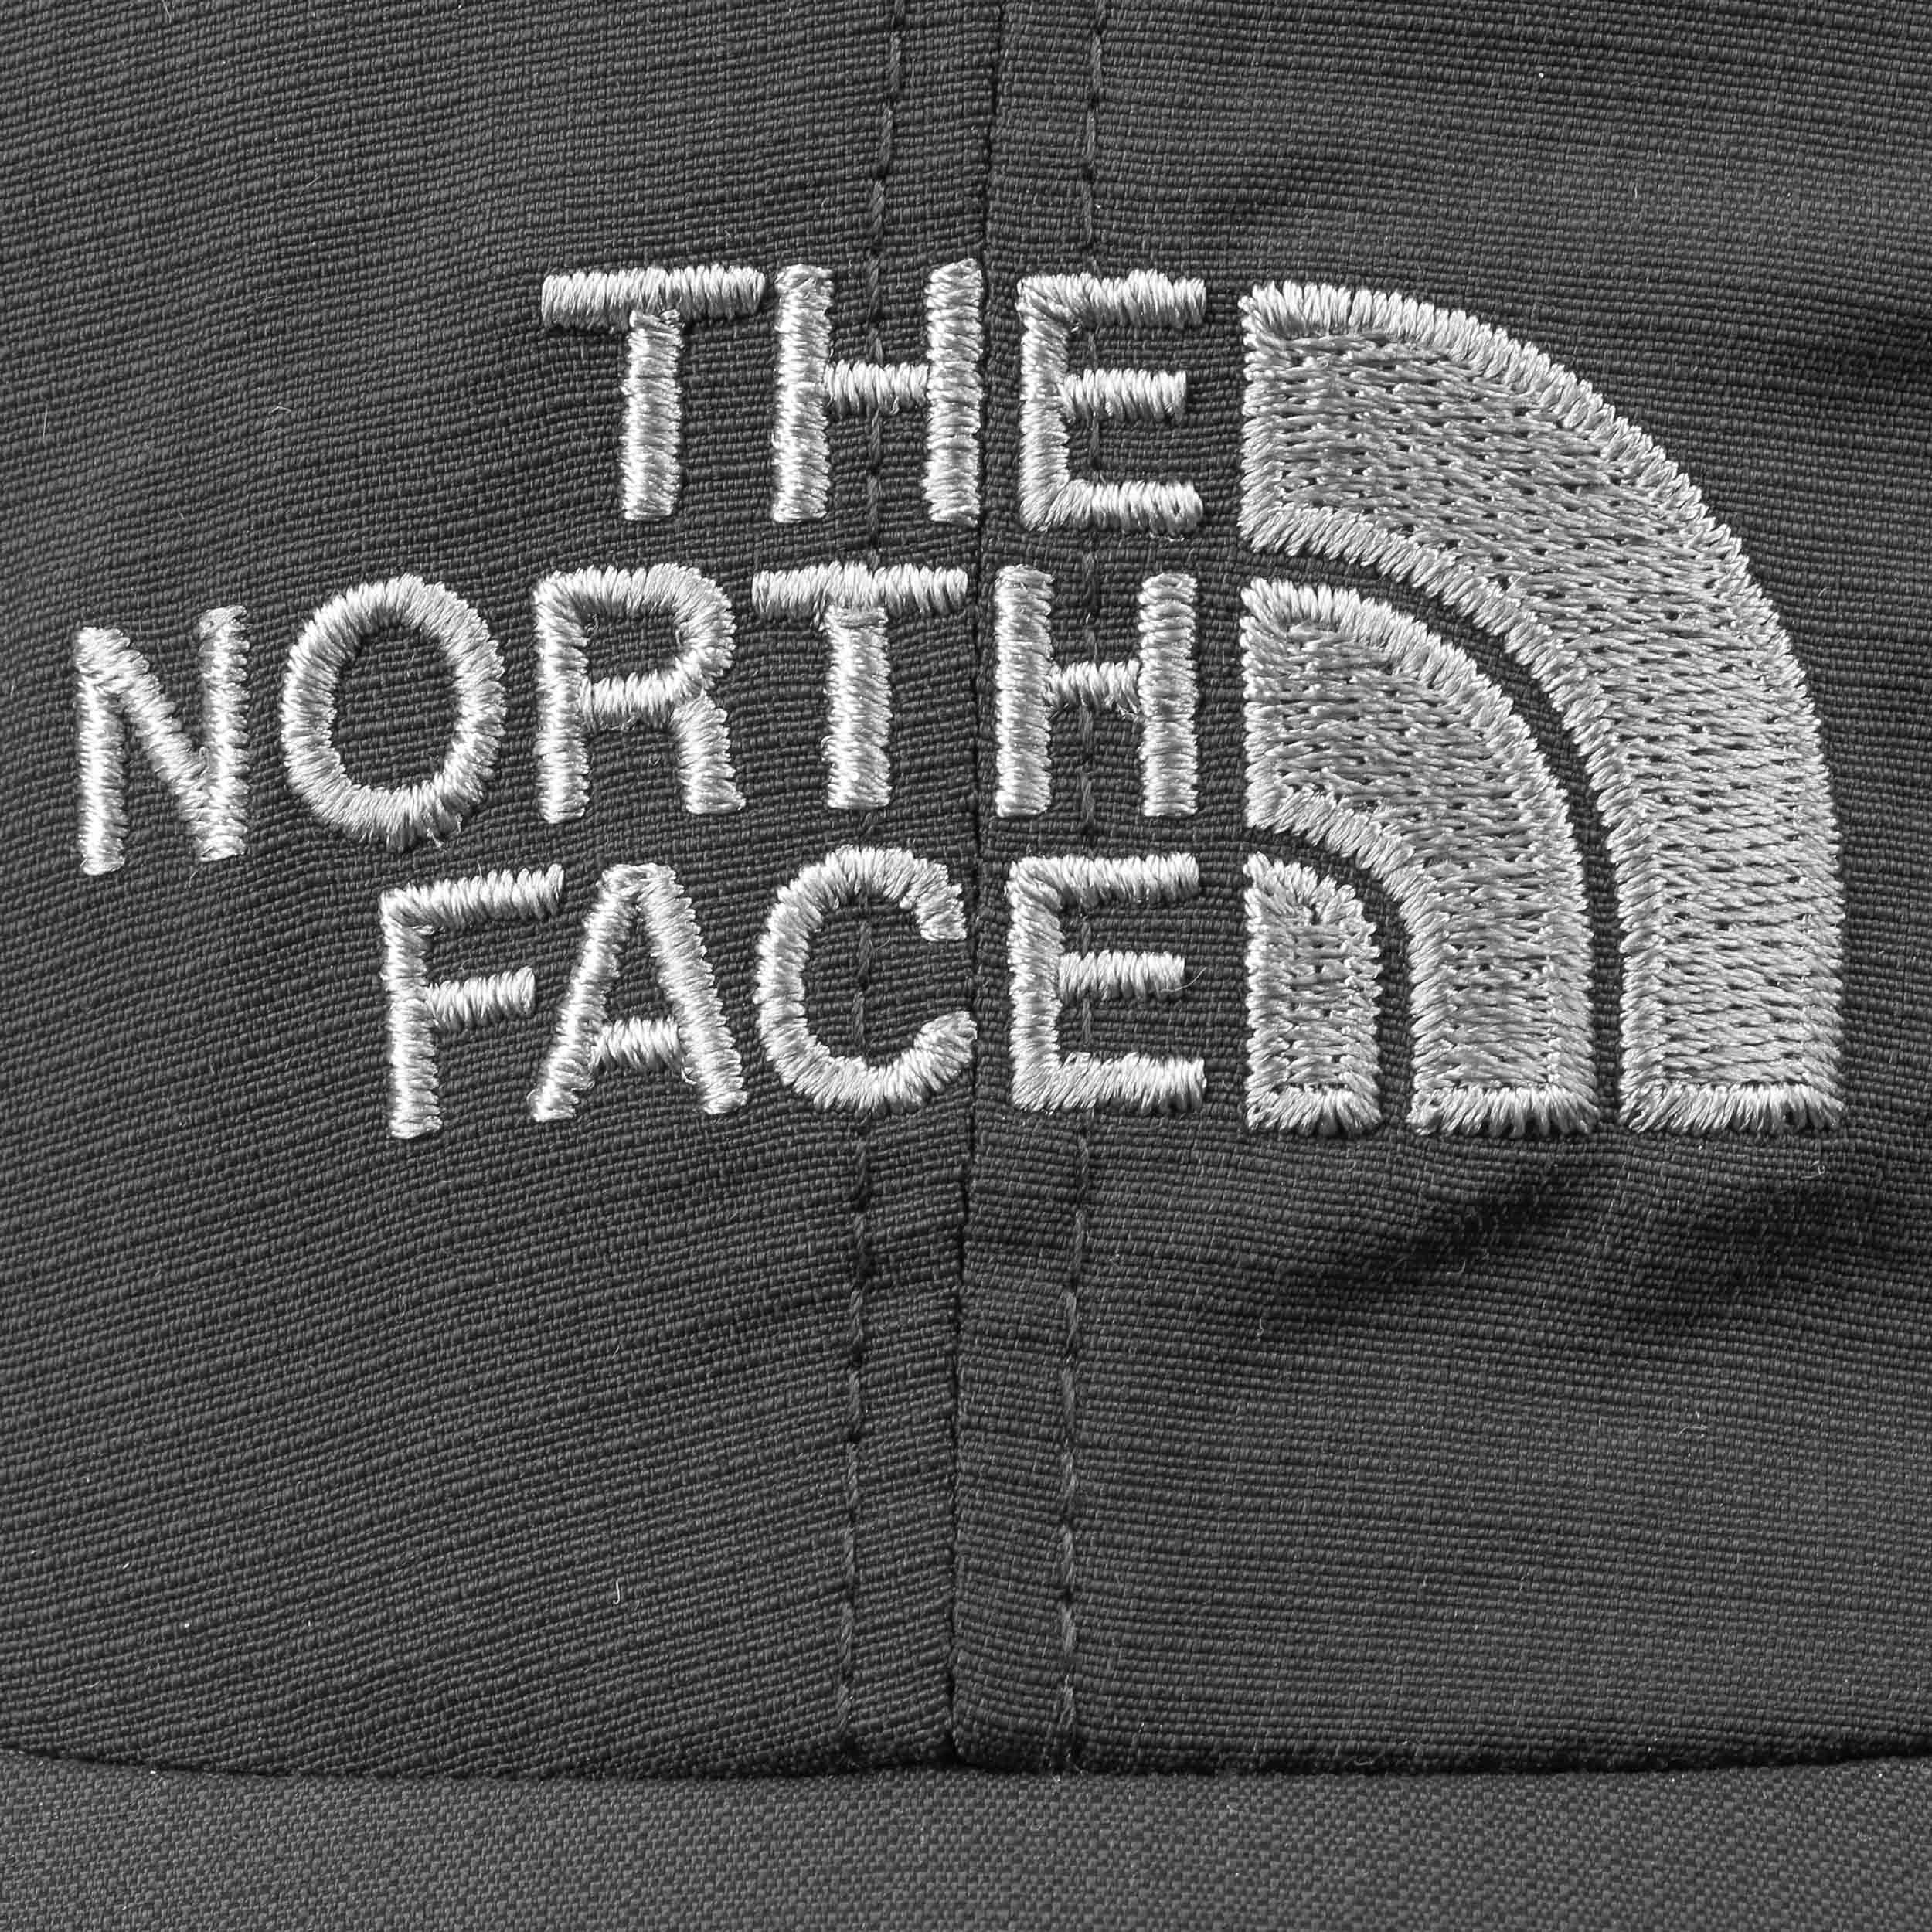 Sun Shield Cap by The North Face - 40,95 €